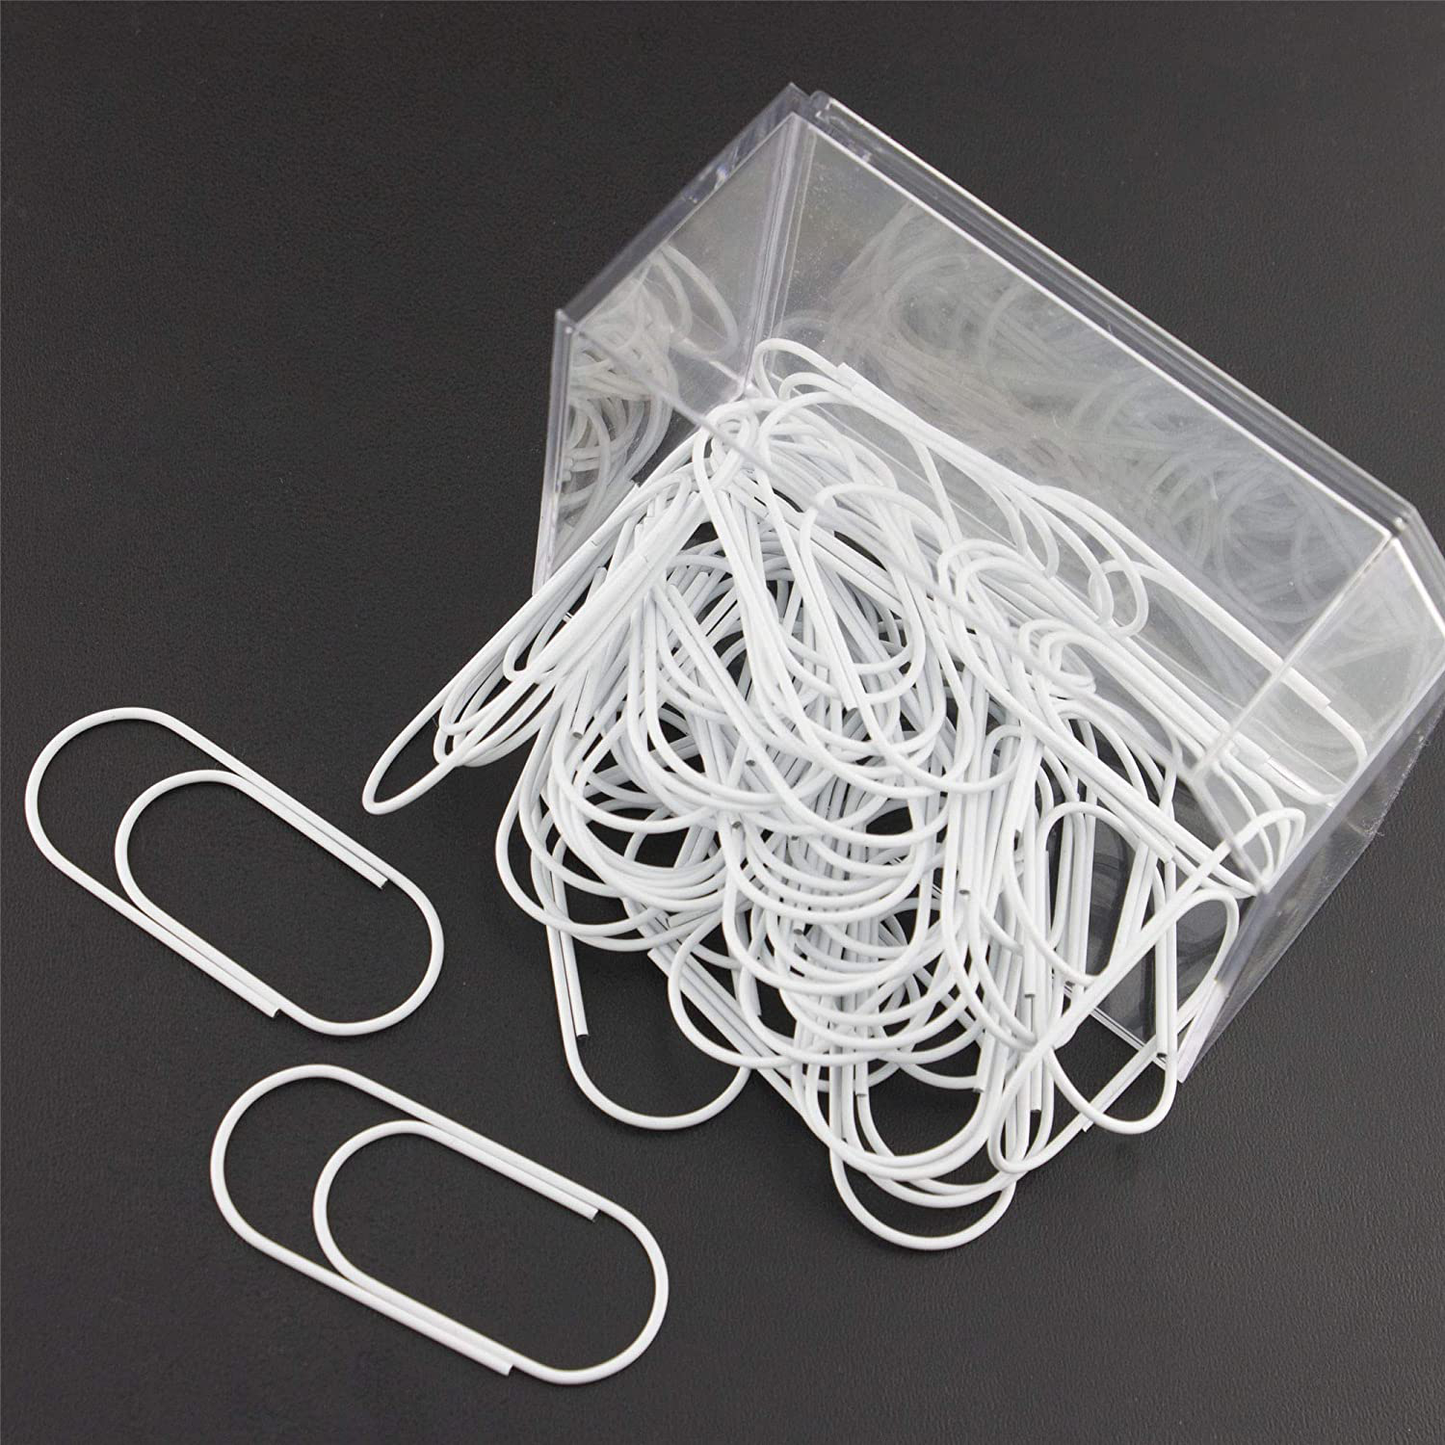 Tesstor Wide Paper Clips Jumbo Smooth Finish Large Paperclips Steel 2 Inch Non Skid Paper Clips for Planner 50mm Office Supplies 50pcs(White) )